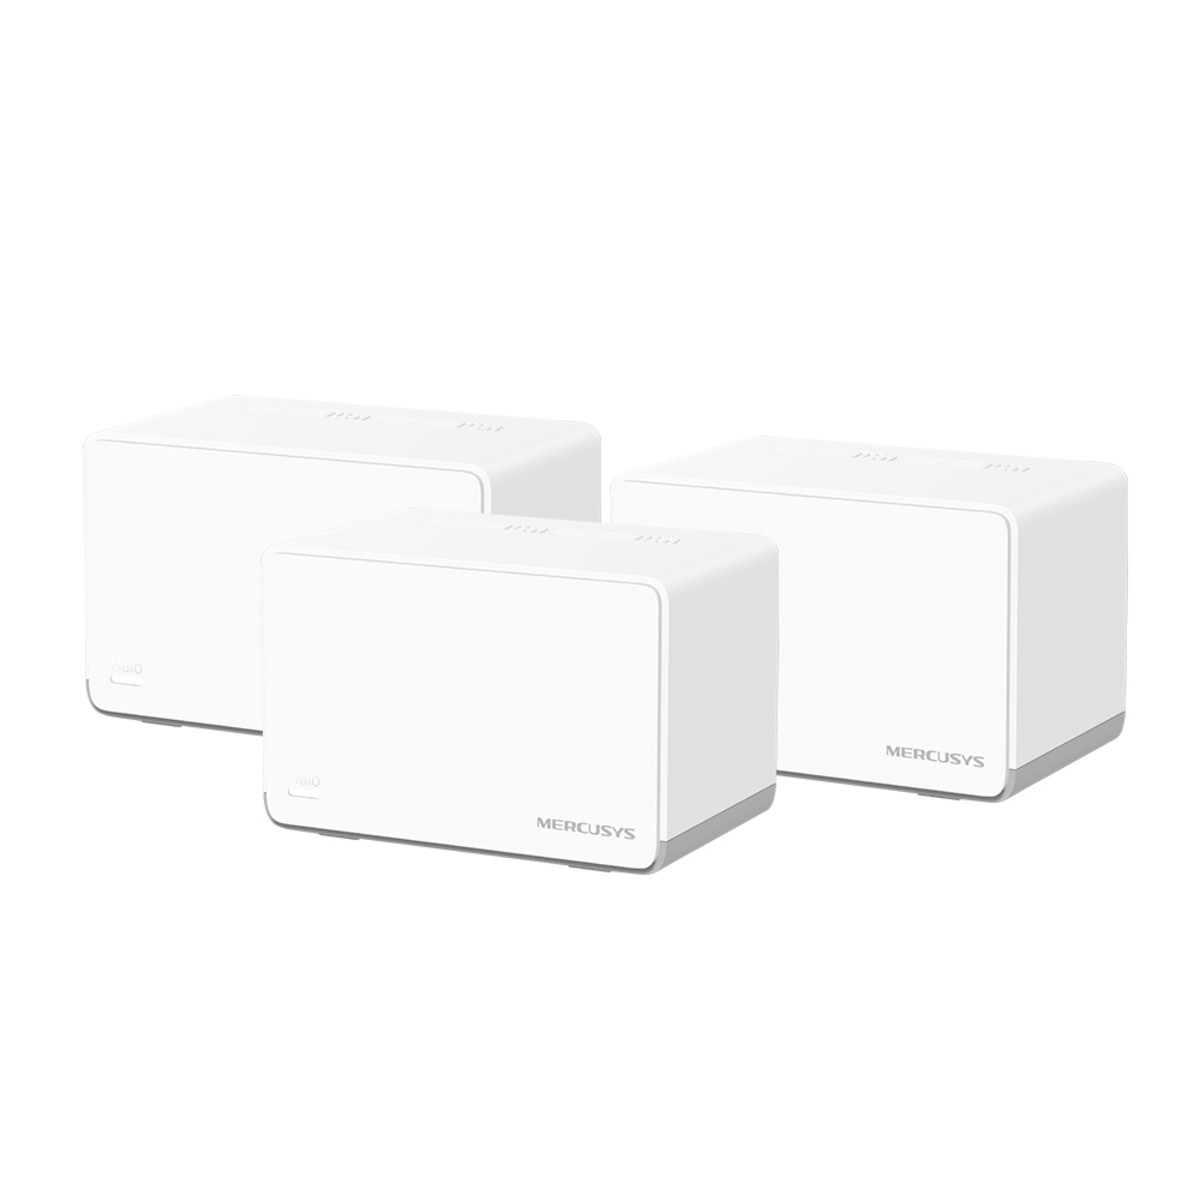 AX1800 Whole Home Mesh Wi-Fi System